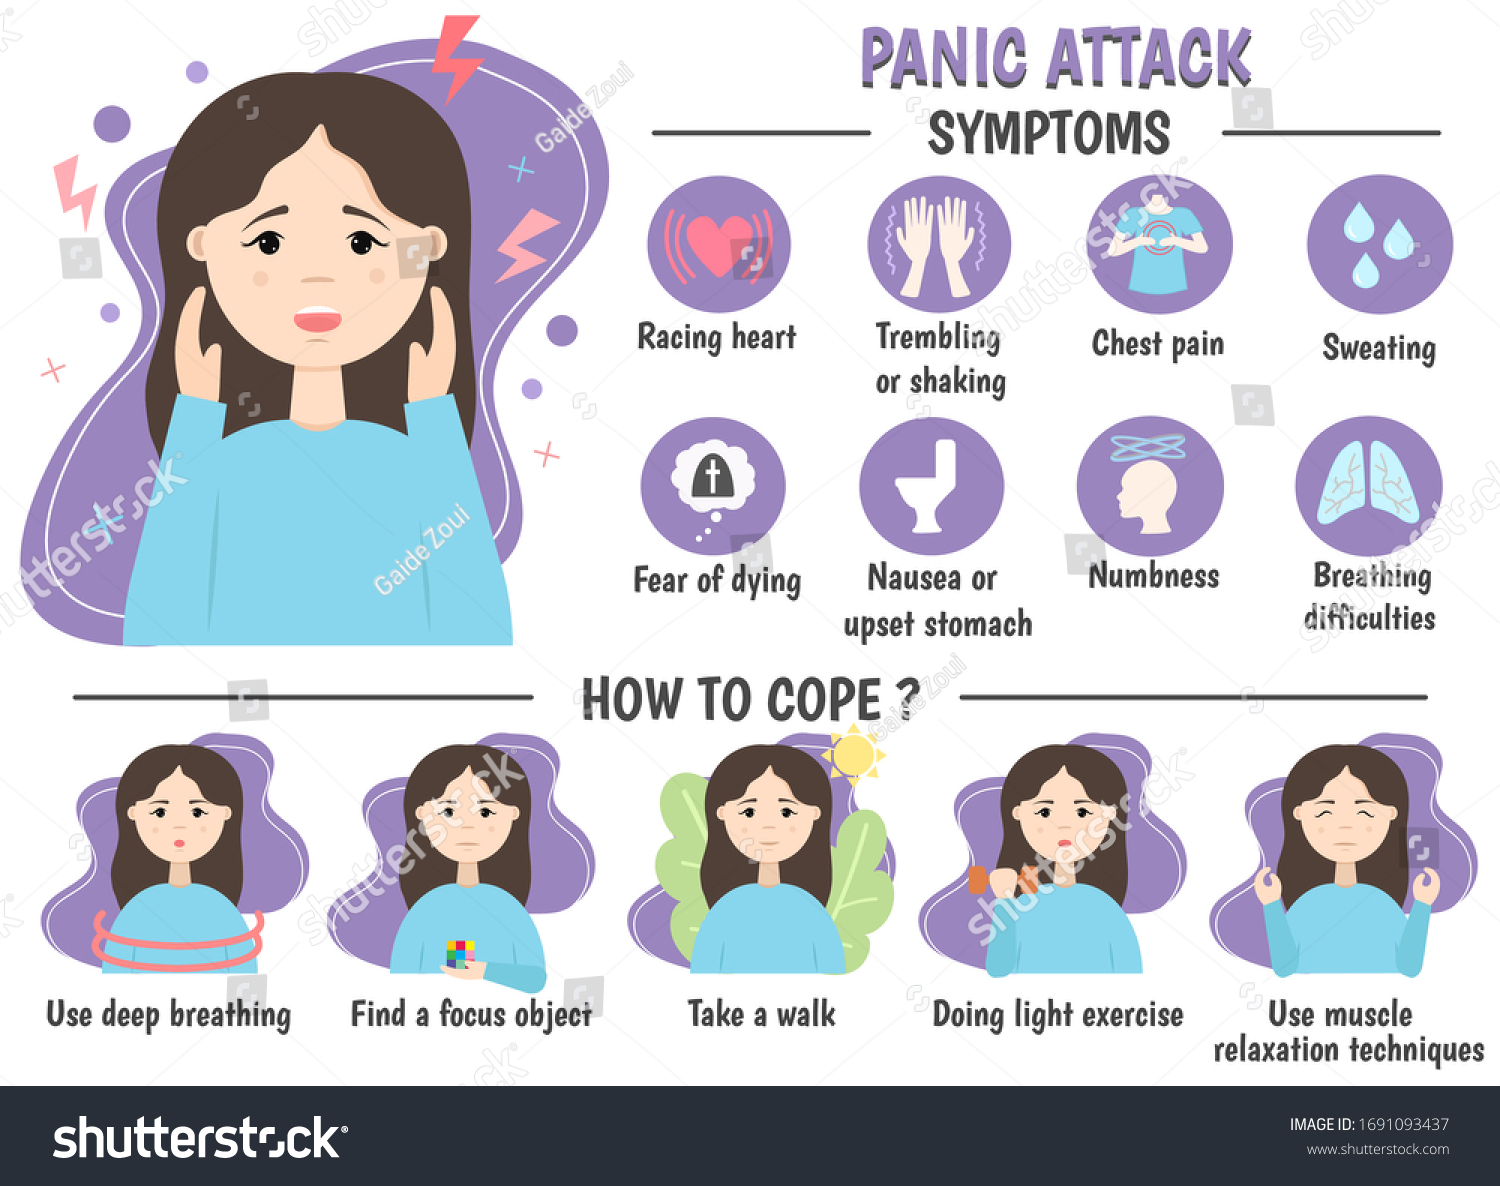 What causes a panic attack